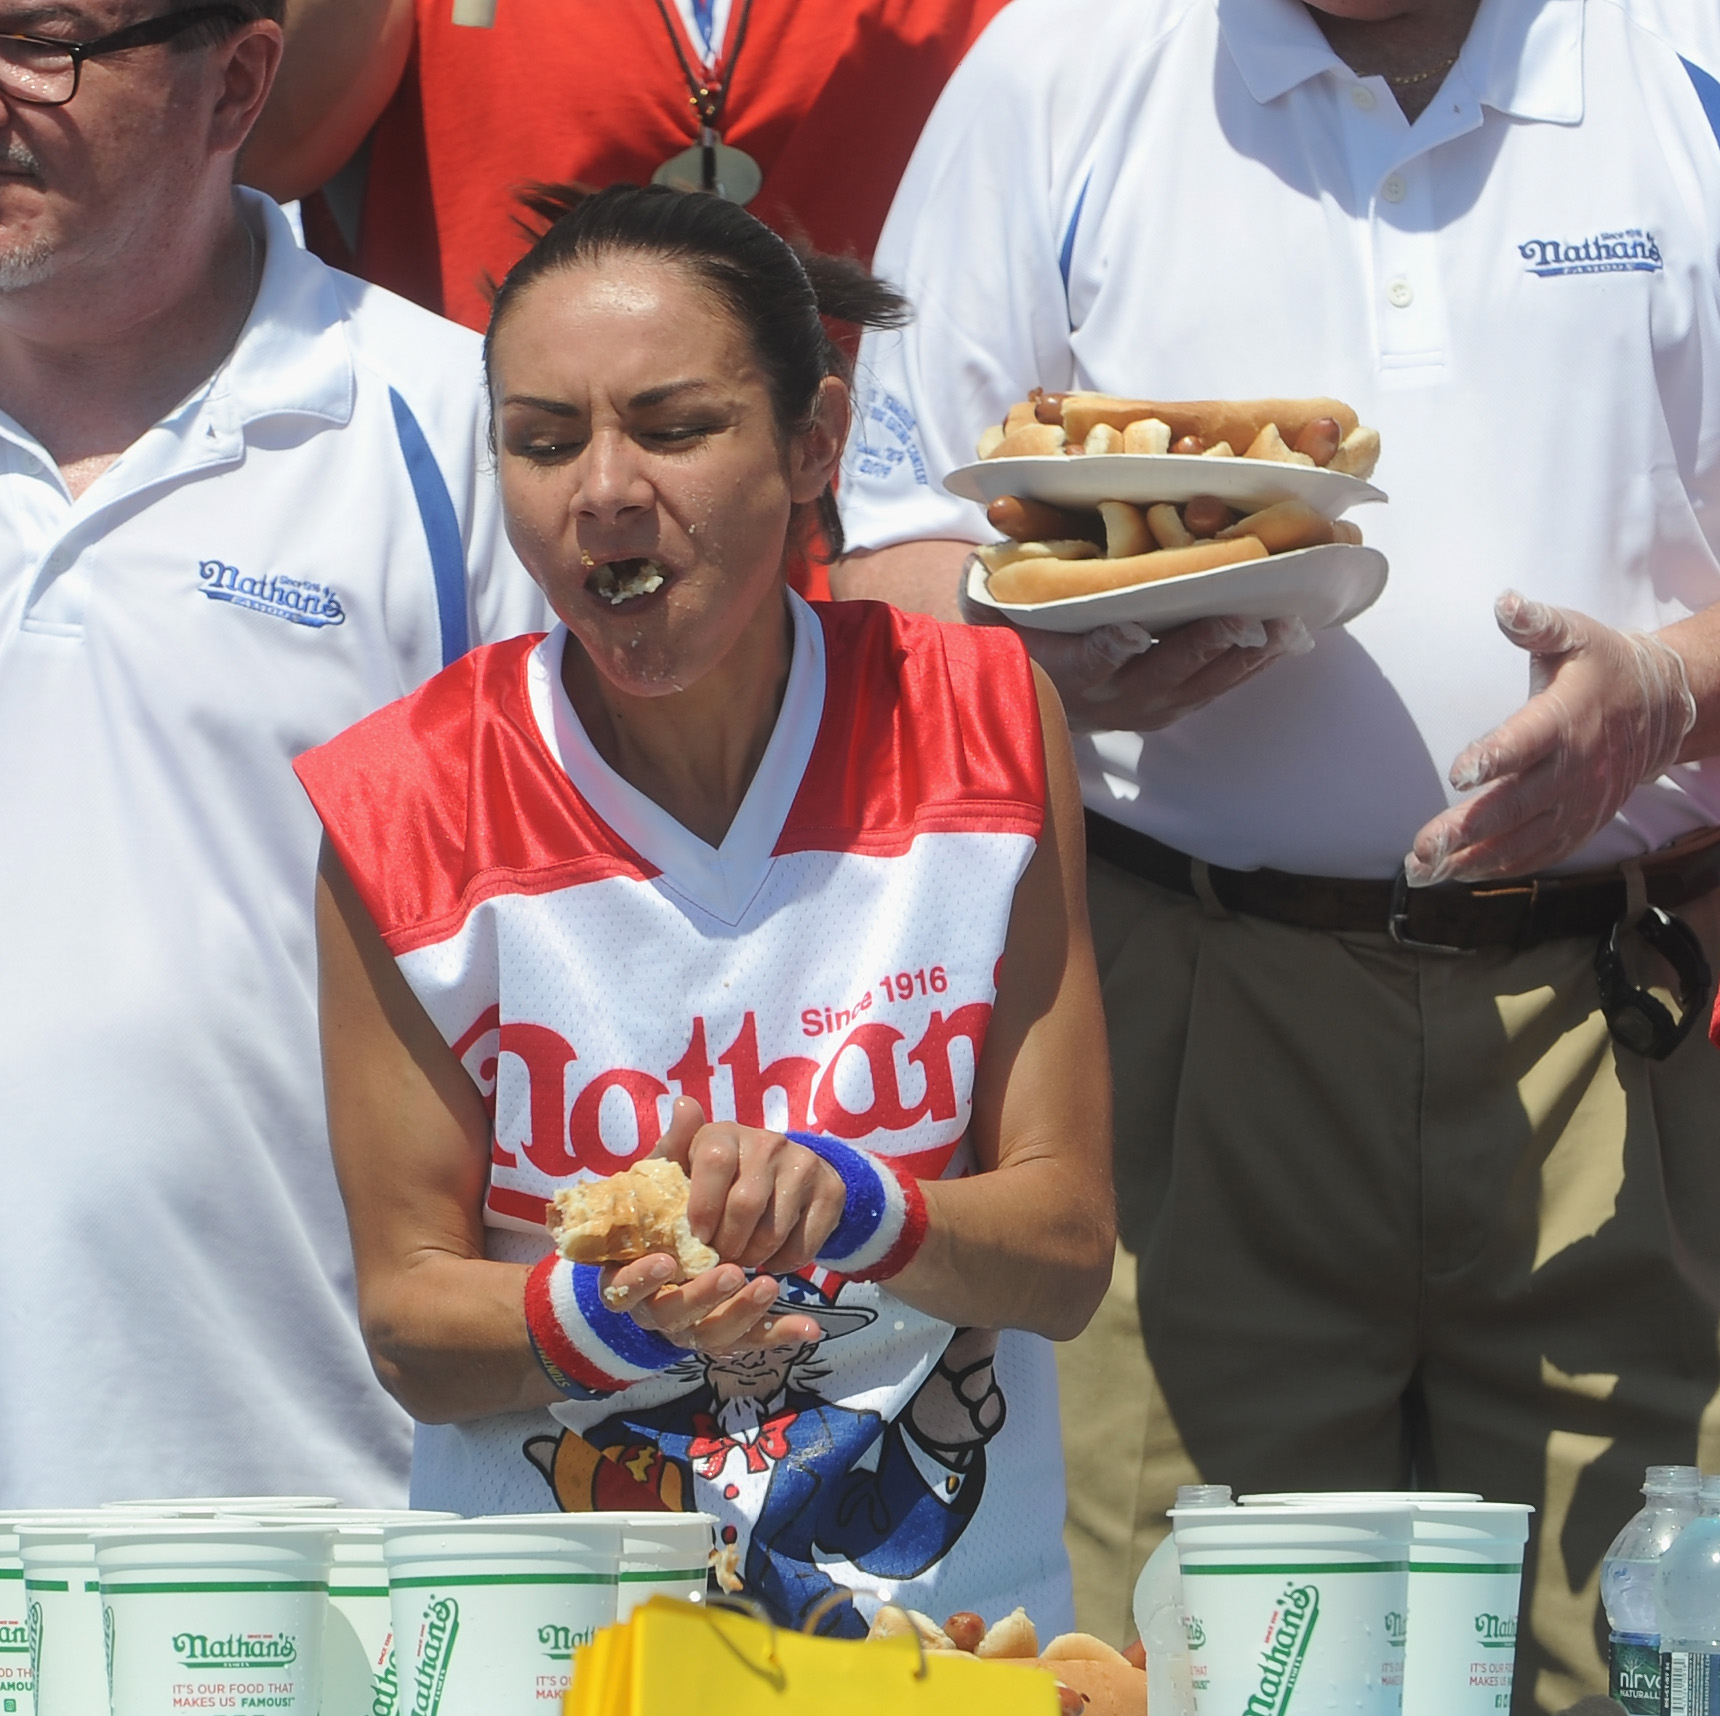 Michelle Lesco competes in the 2019 Nathans Famous Fourth of July International Hot Dog Eating Contest at Coney Island on July 4, 2019 in the Brooklyn borough of New York City.